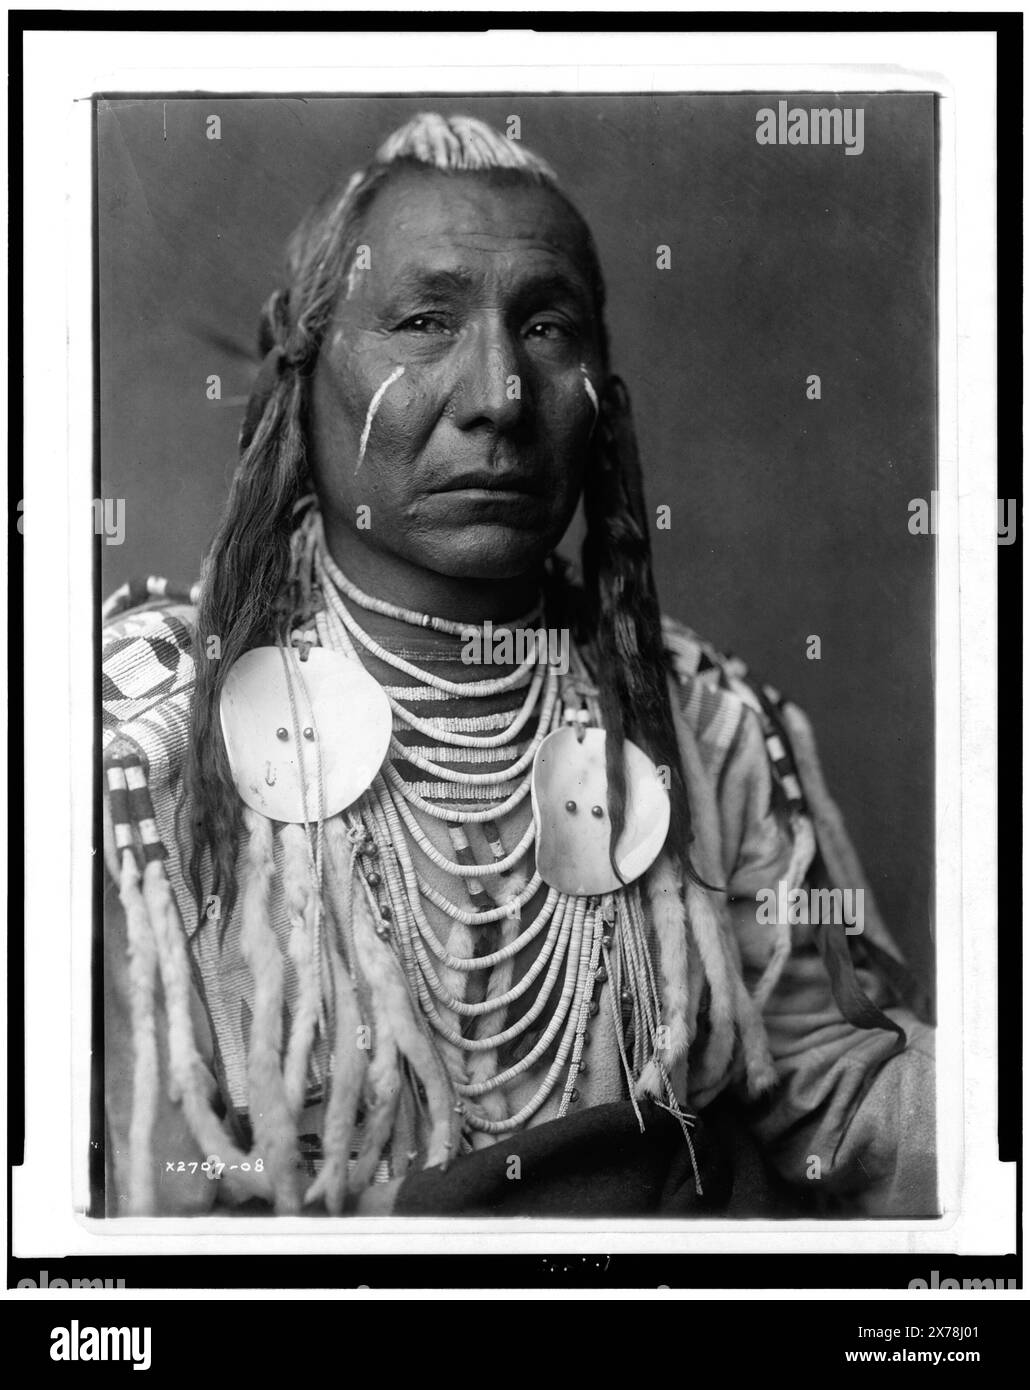 Red Wing Apsaroke, Edward S. Curtis Collection., Curtis no. 2707-08., Published in: The North American Indian / Edward S. Curtis. [Seattle, Wash.] : Edward S. Curtis, 1907-30 suppl., v. 4, pl. 120.. Red Wing. , Indians of North America, Montana, Clothing & dress, 1900-1910. , Crow Indians, Clothing & dress, 1900-1910. Stock Photo